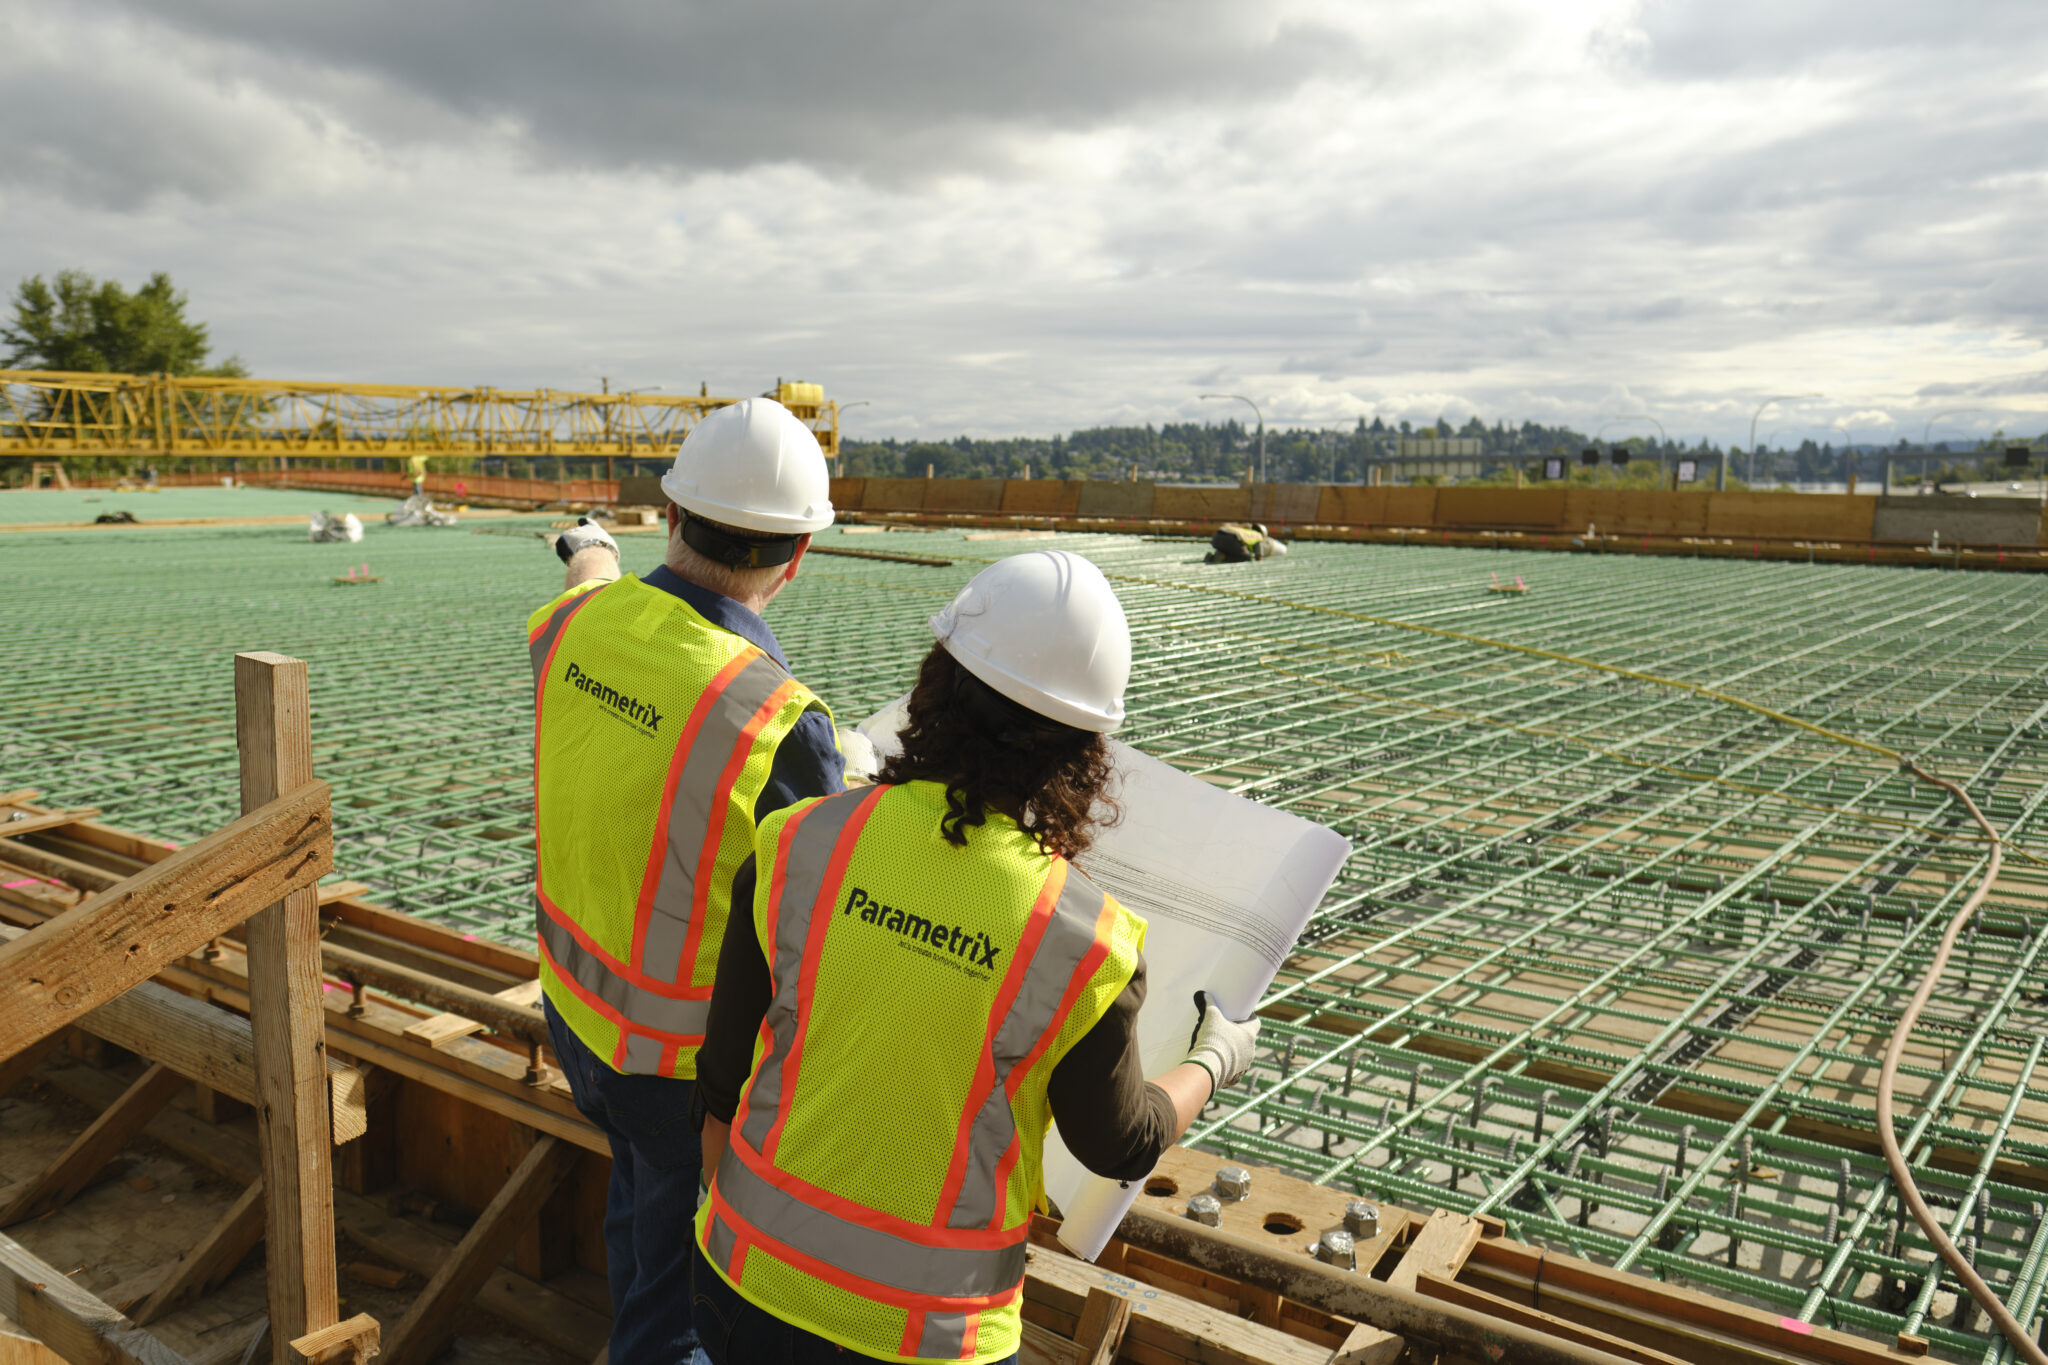 Two people wearing safety vests and hard hats look over a construction site